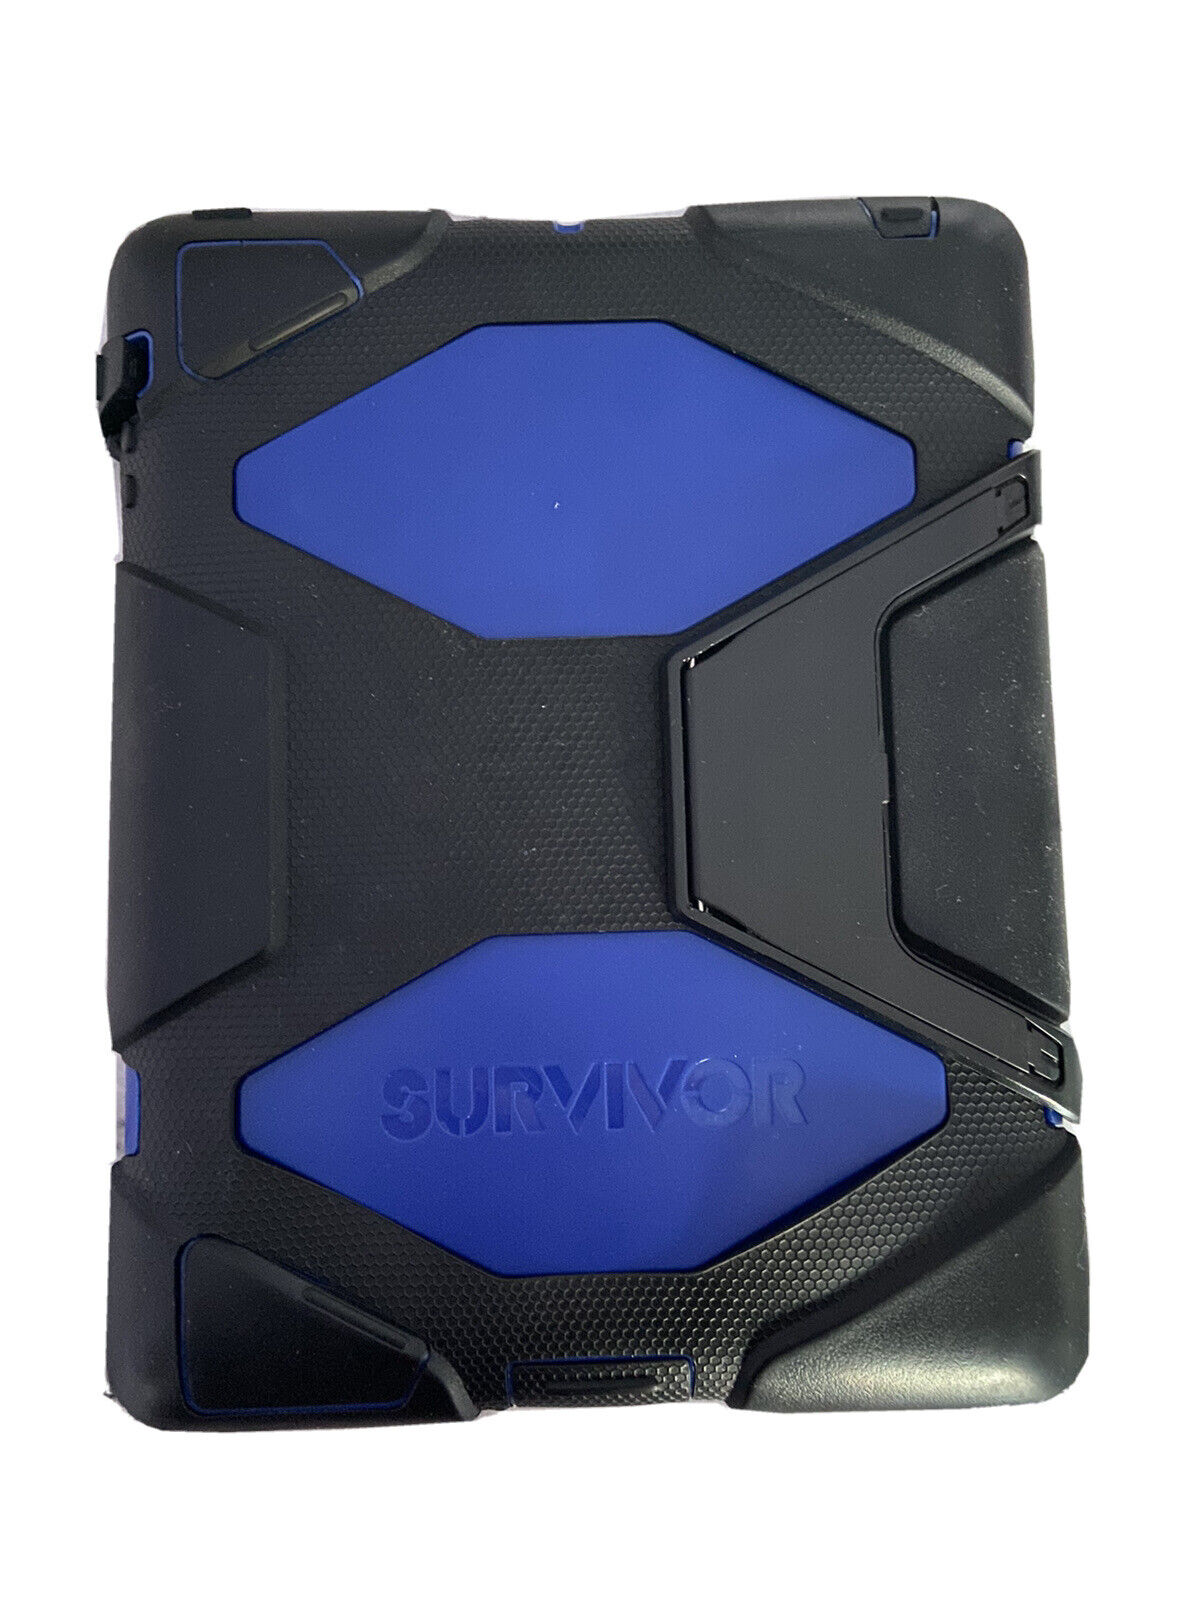 Griffin Technology Survivor Case for iPad 2/3/4 Black&Blue With Removable Stand